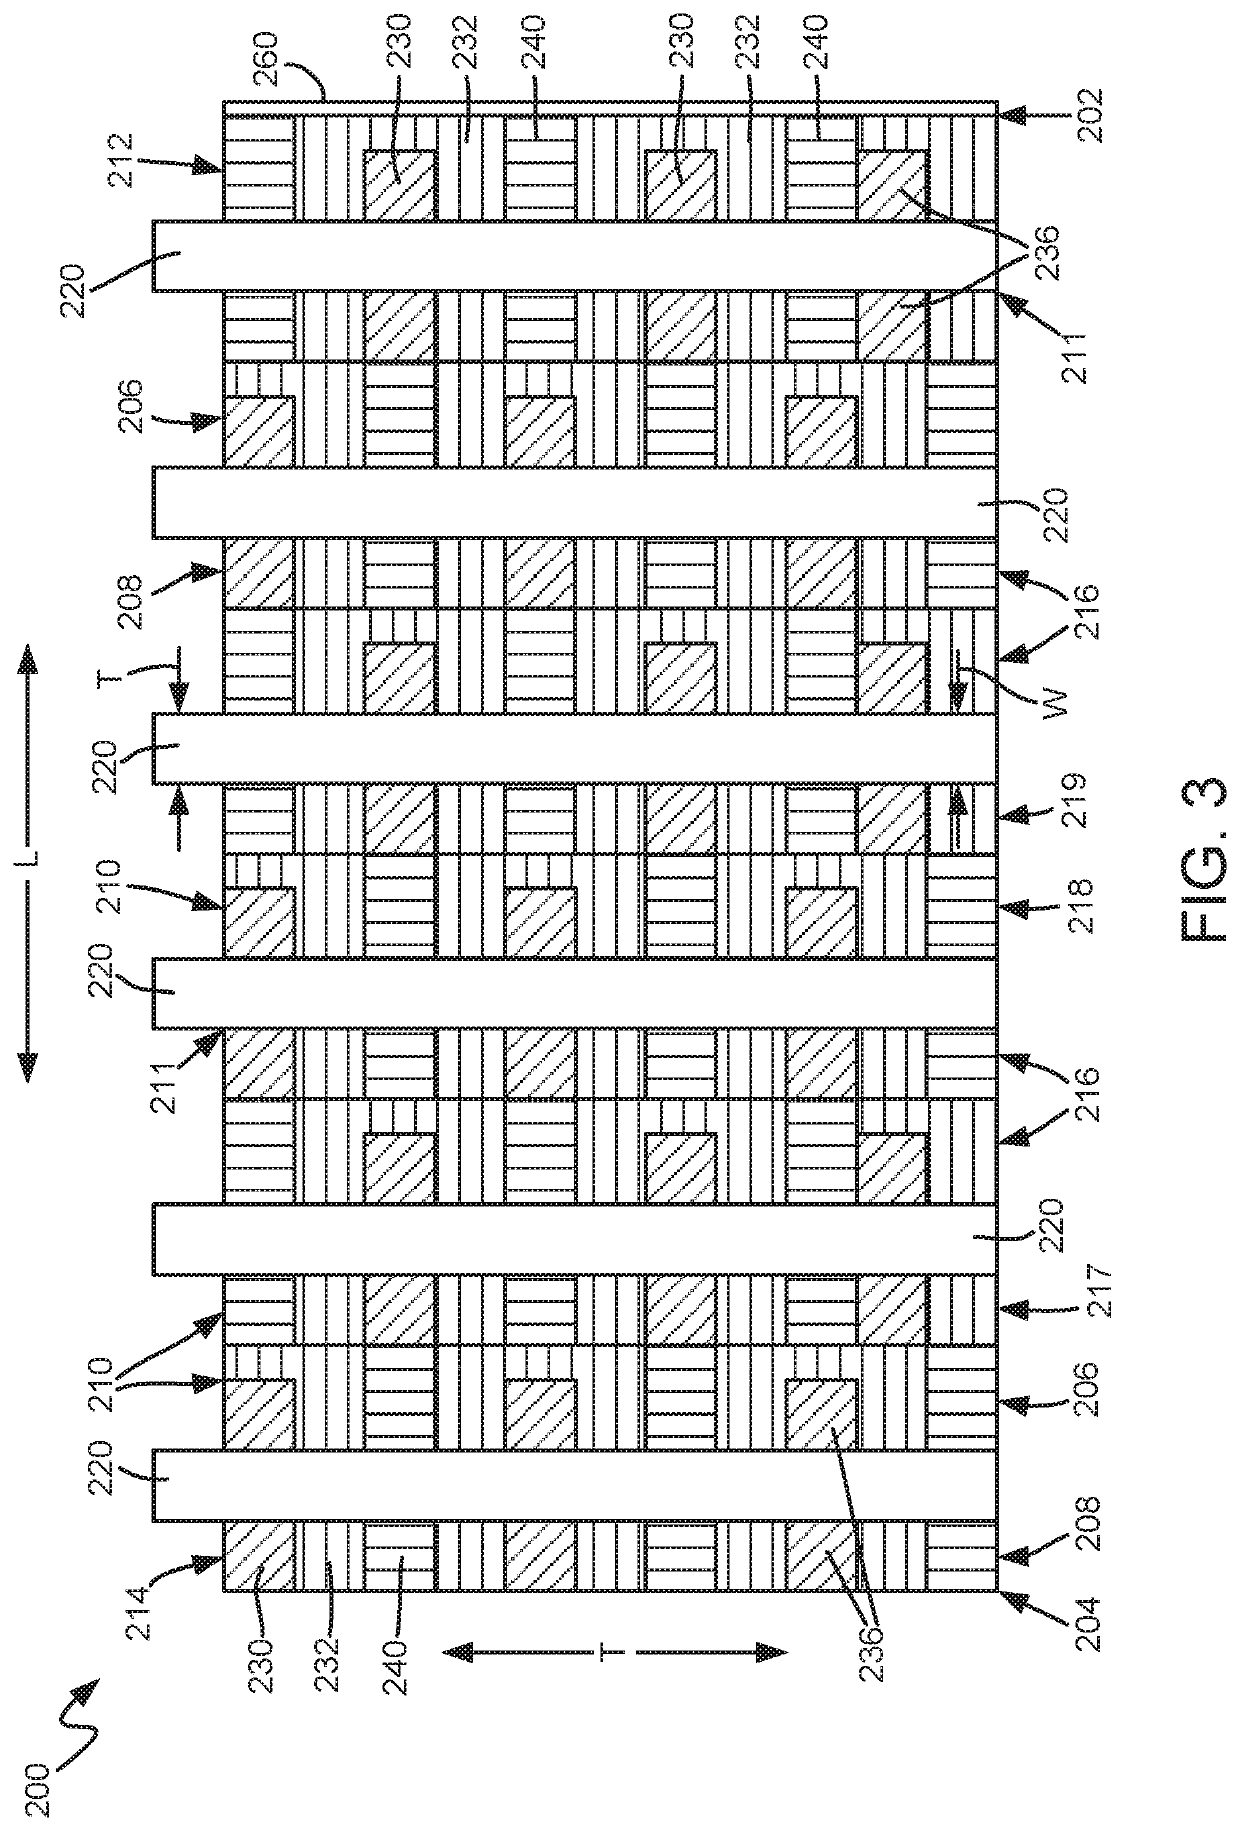 Magneto-caloric thermal diode assembly